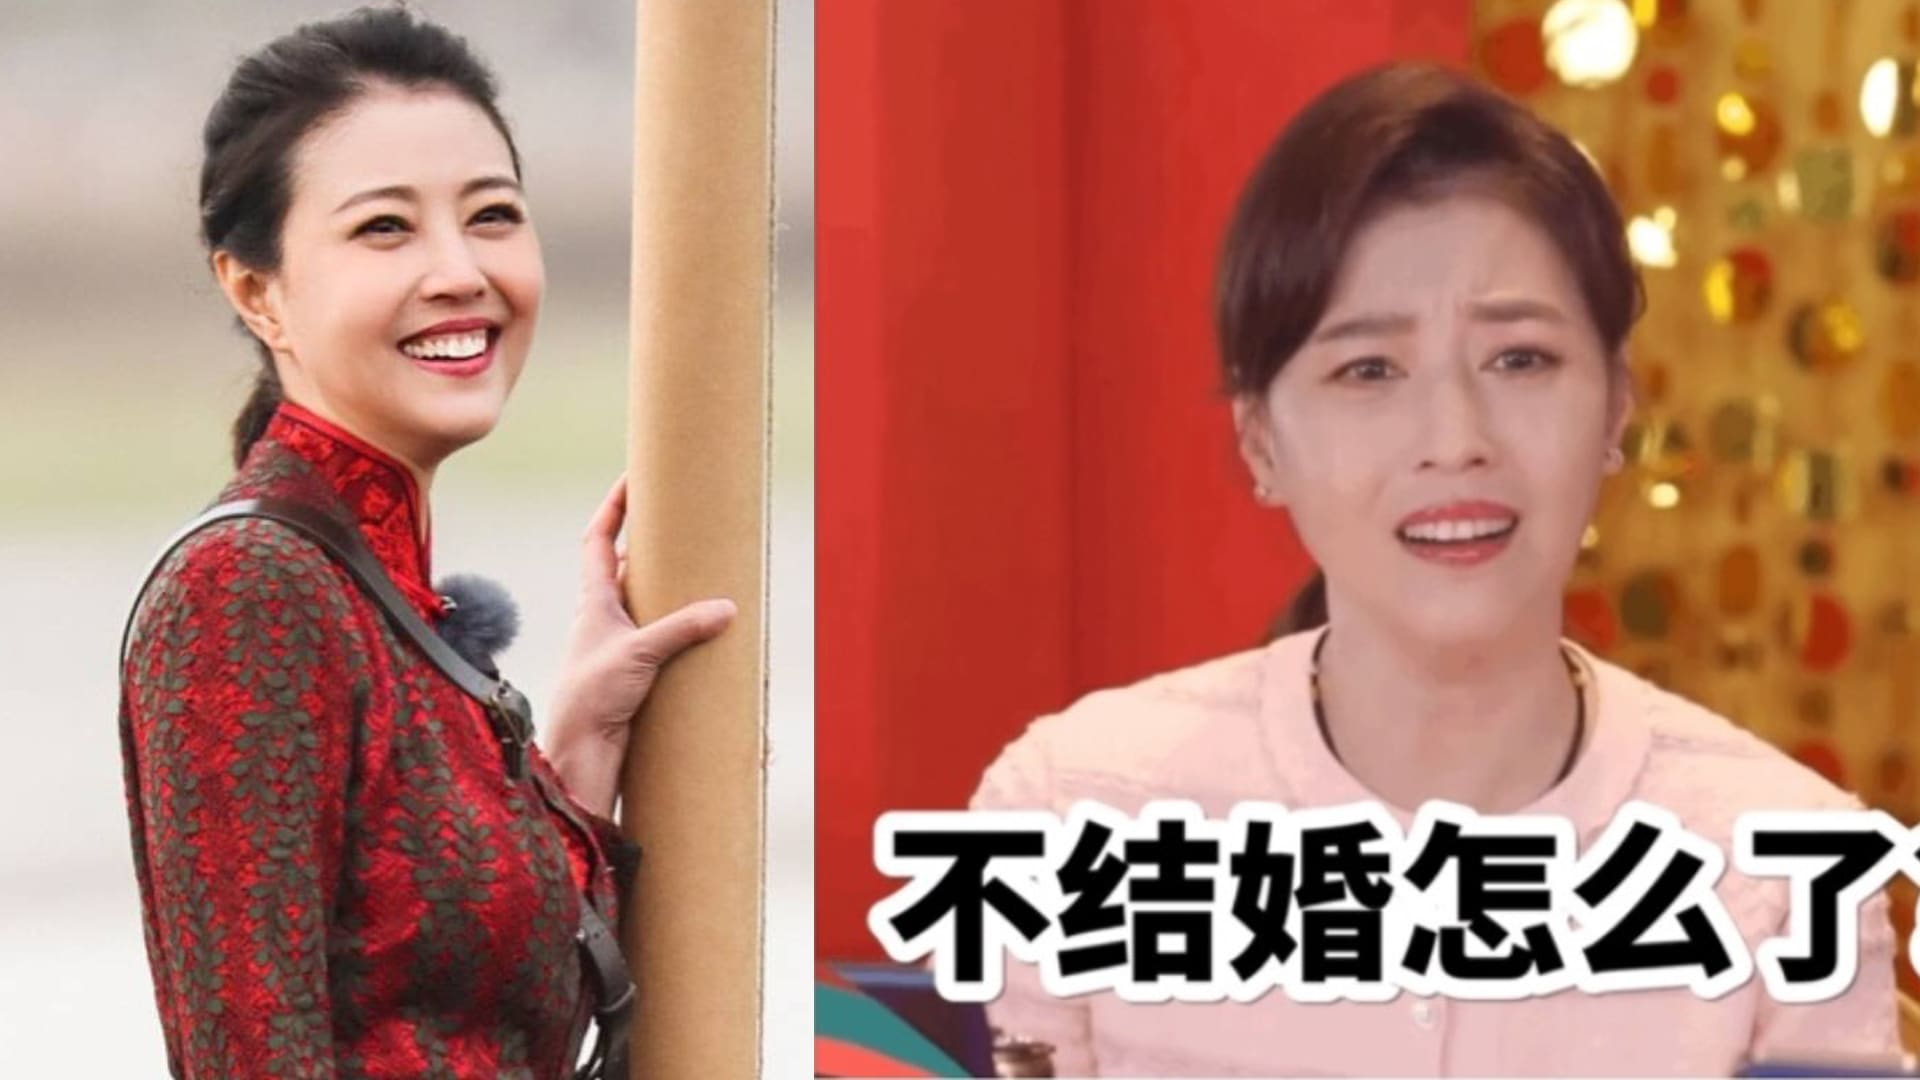 Kathy Chow, 53, Claps Back At Netizens: So What If I’m Not Married?